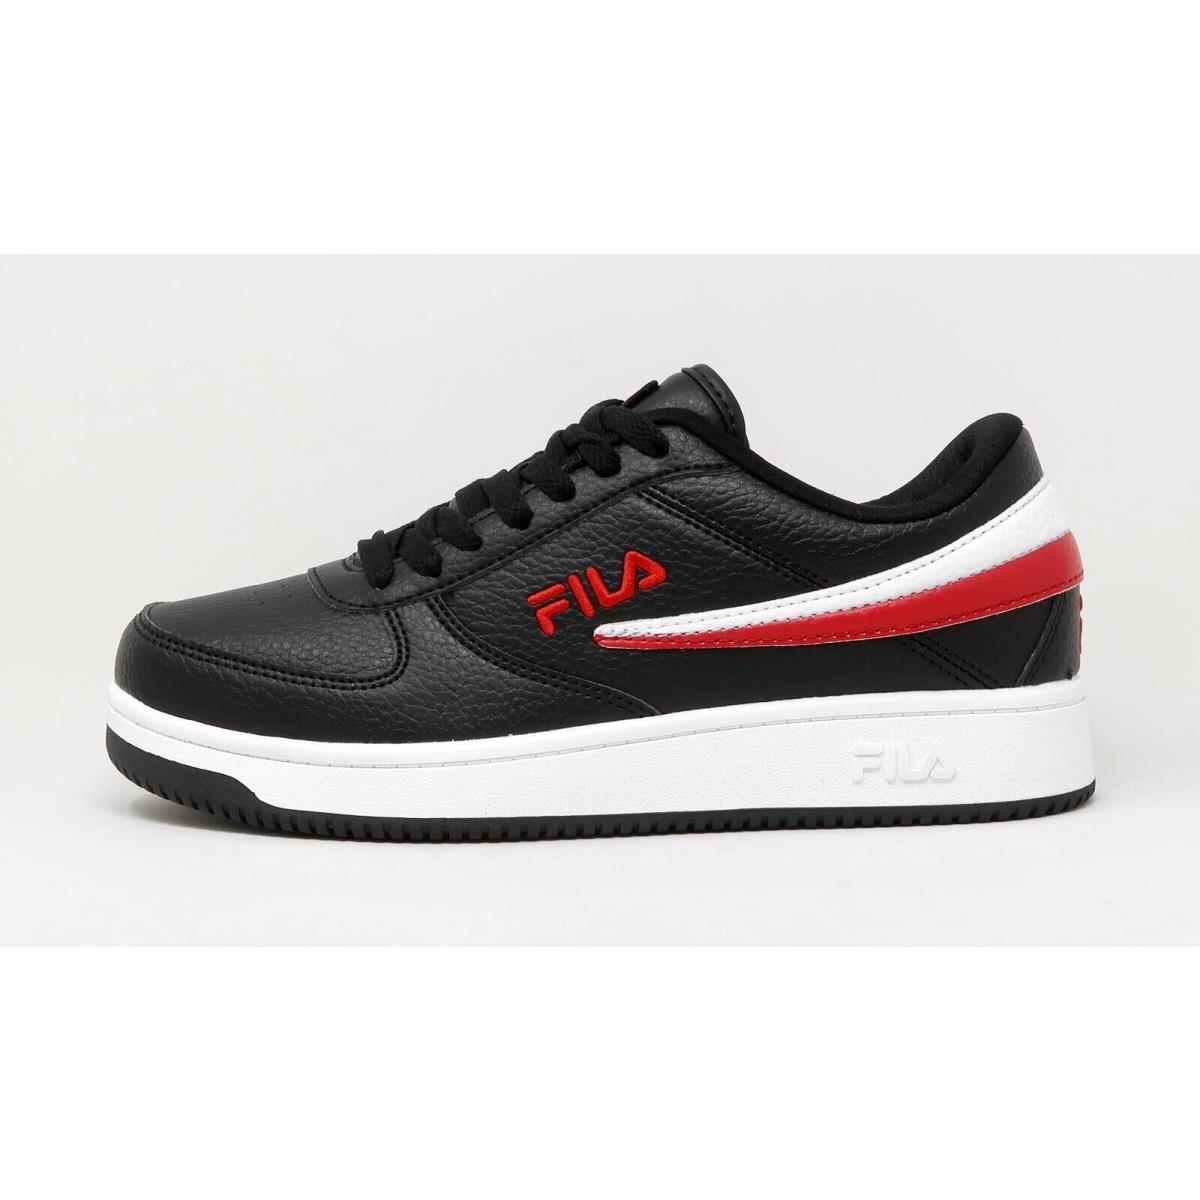 Fila Men Shoes A-low Leather Black Red White Sneakers